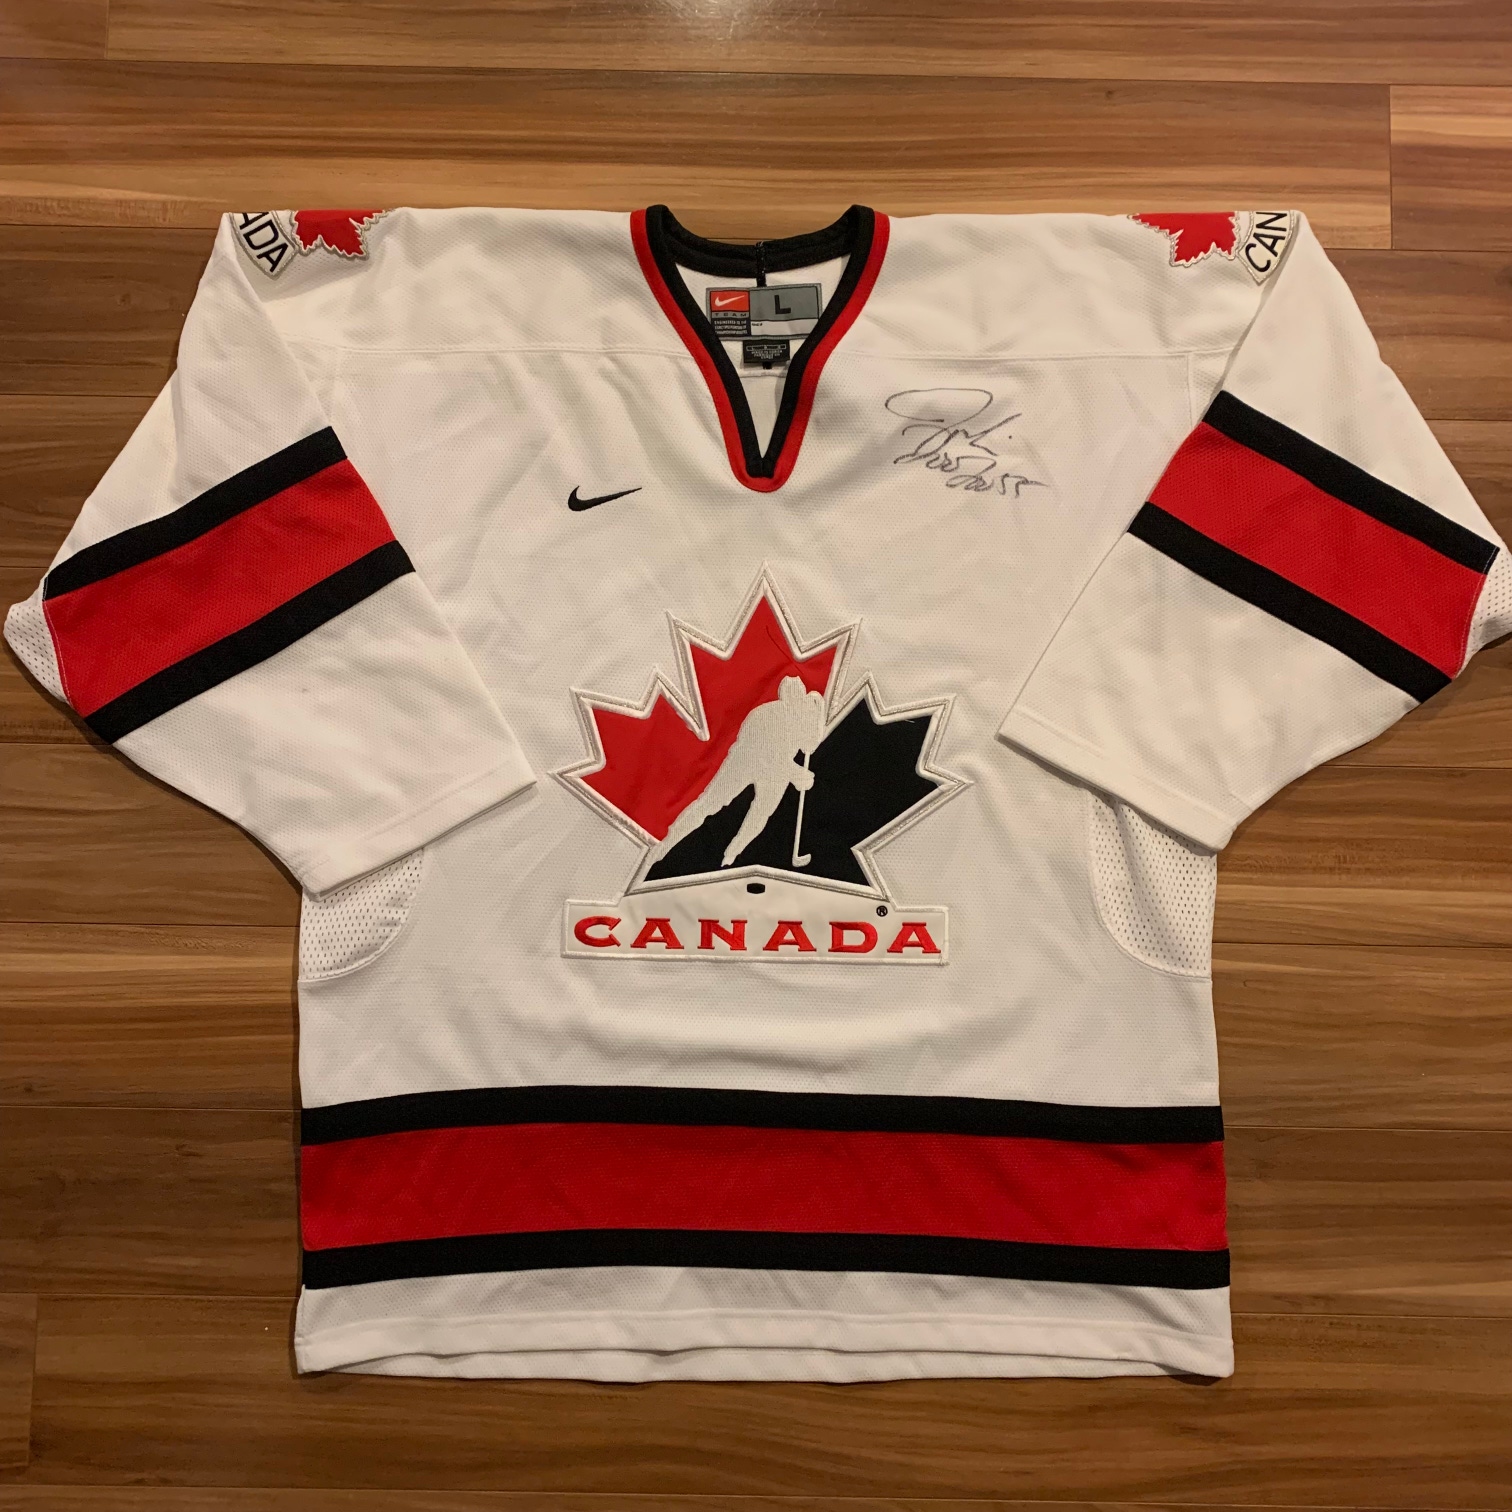 Team Canada 2002 White Large Adult Nike Jersey